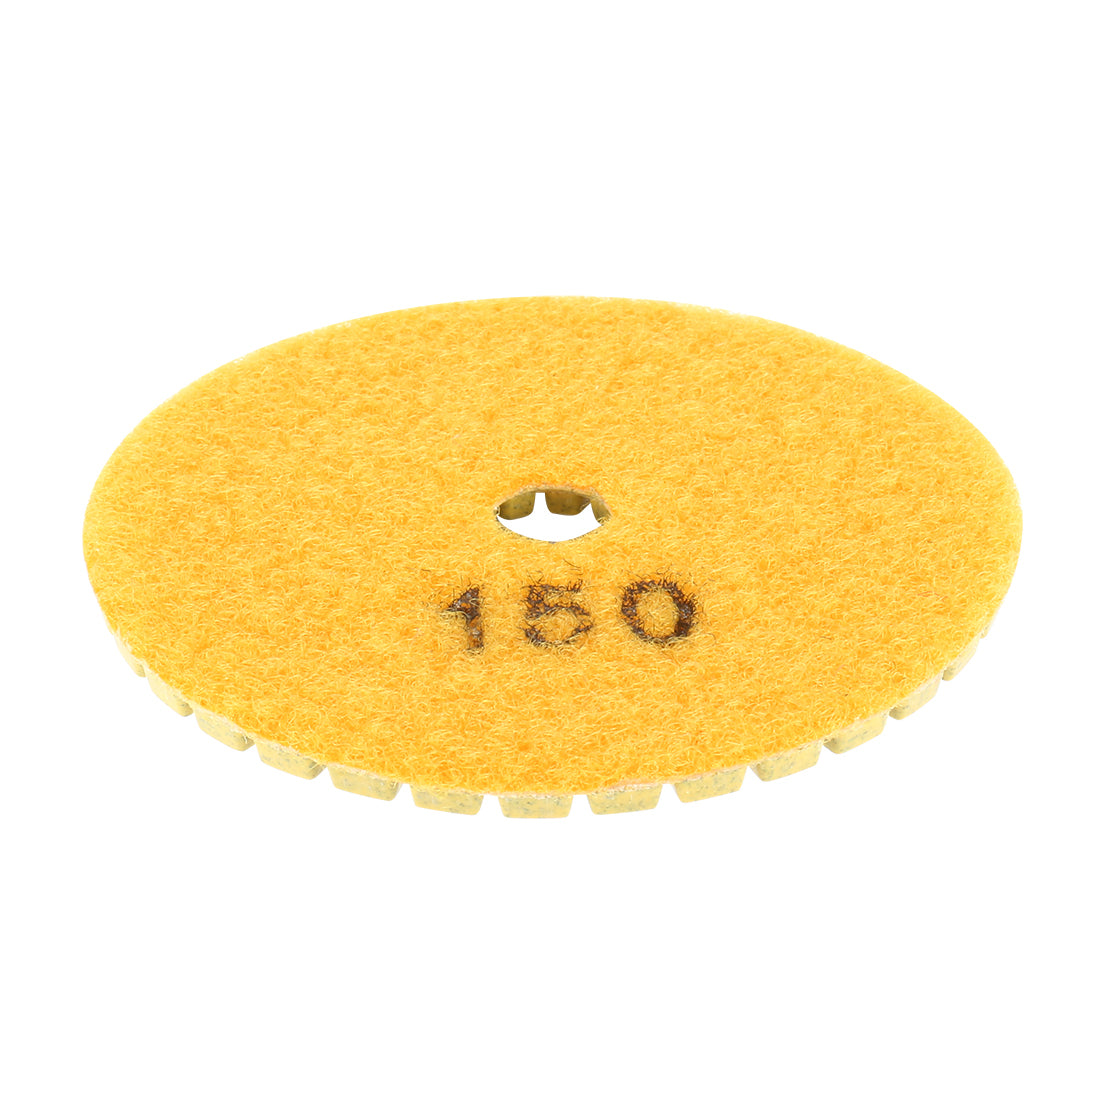 uxcell Uxcell 3-inch Diamond Wet Polishing Pad Grit 150 10pcs for Granite Stone Marble